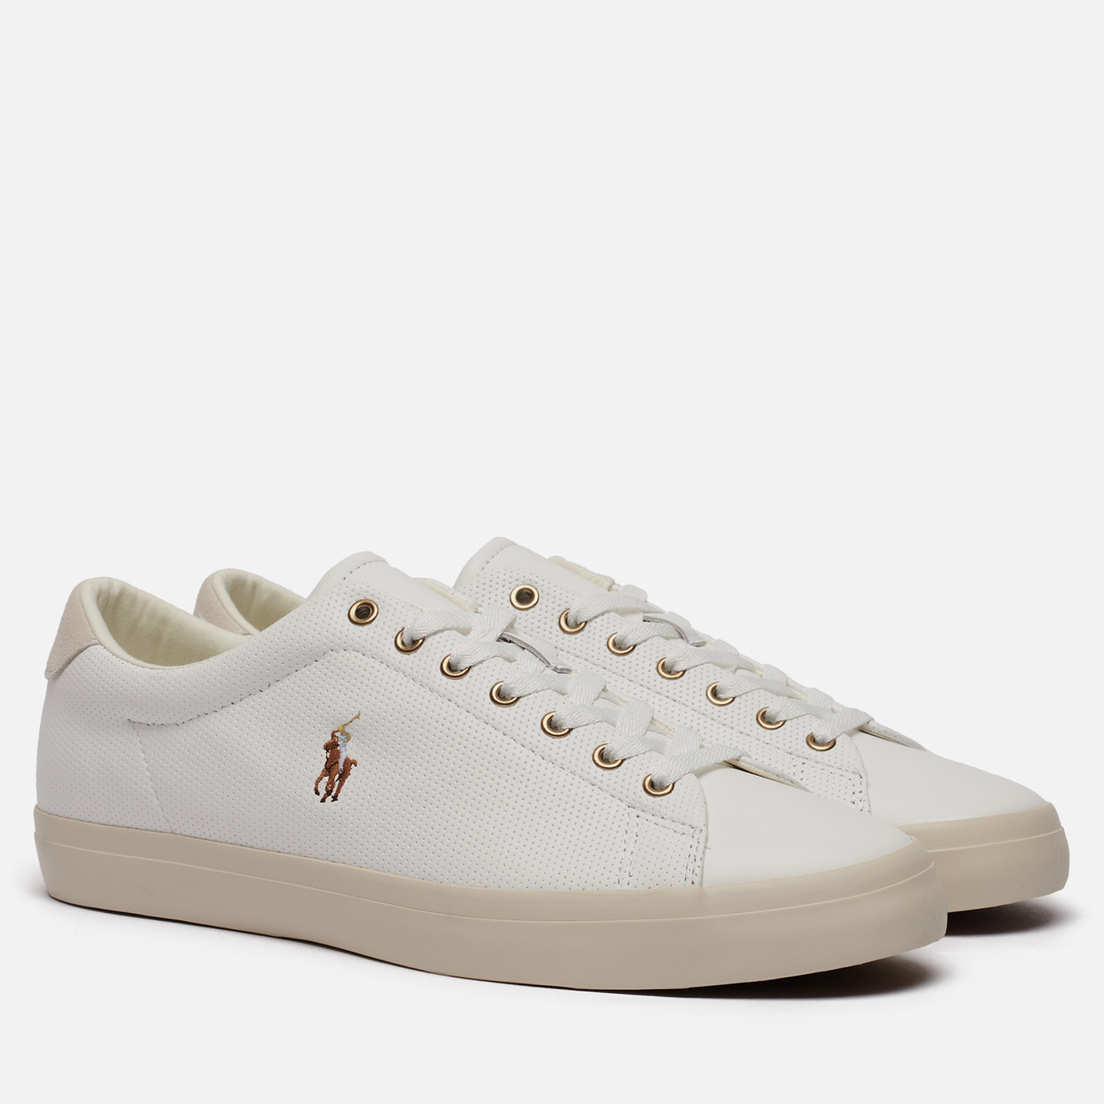 Polo Ralph Lauren Мужские кроссовки Longwood Perforated Nappa Smooth Leather